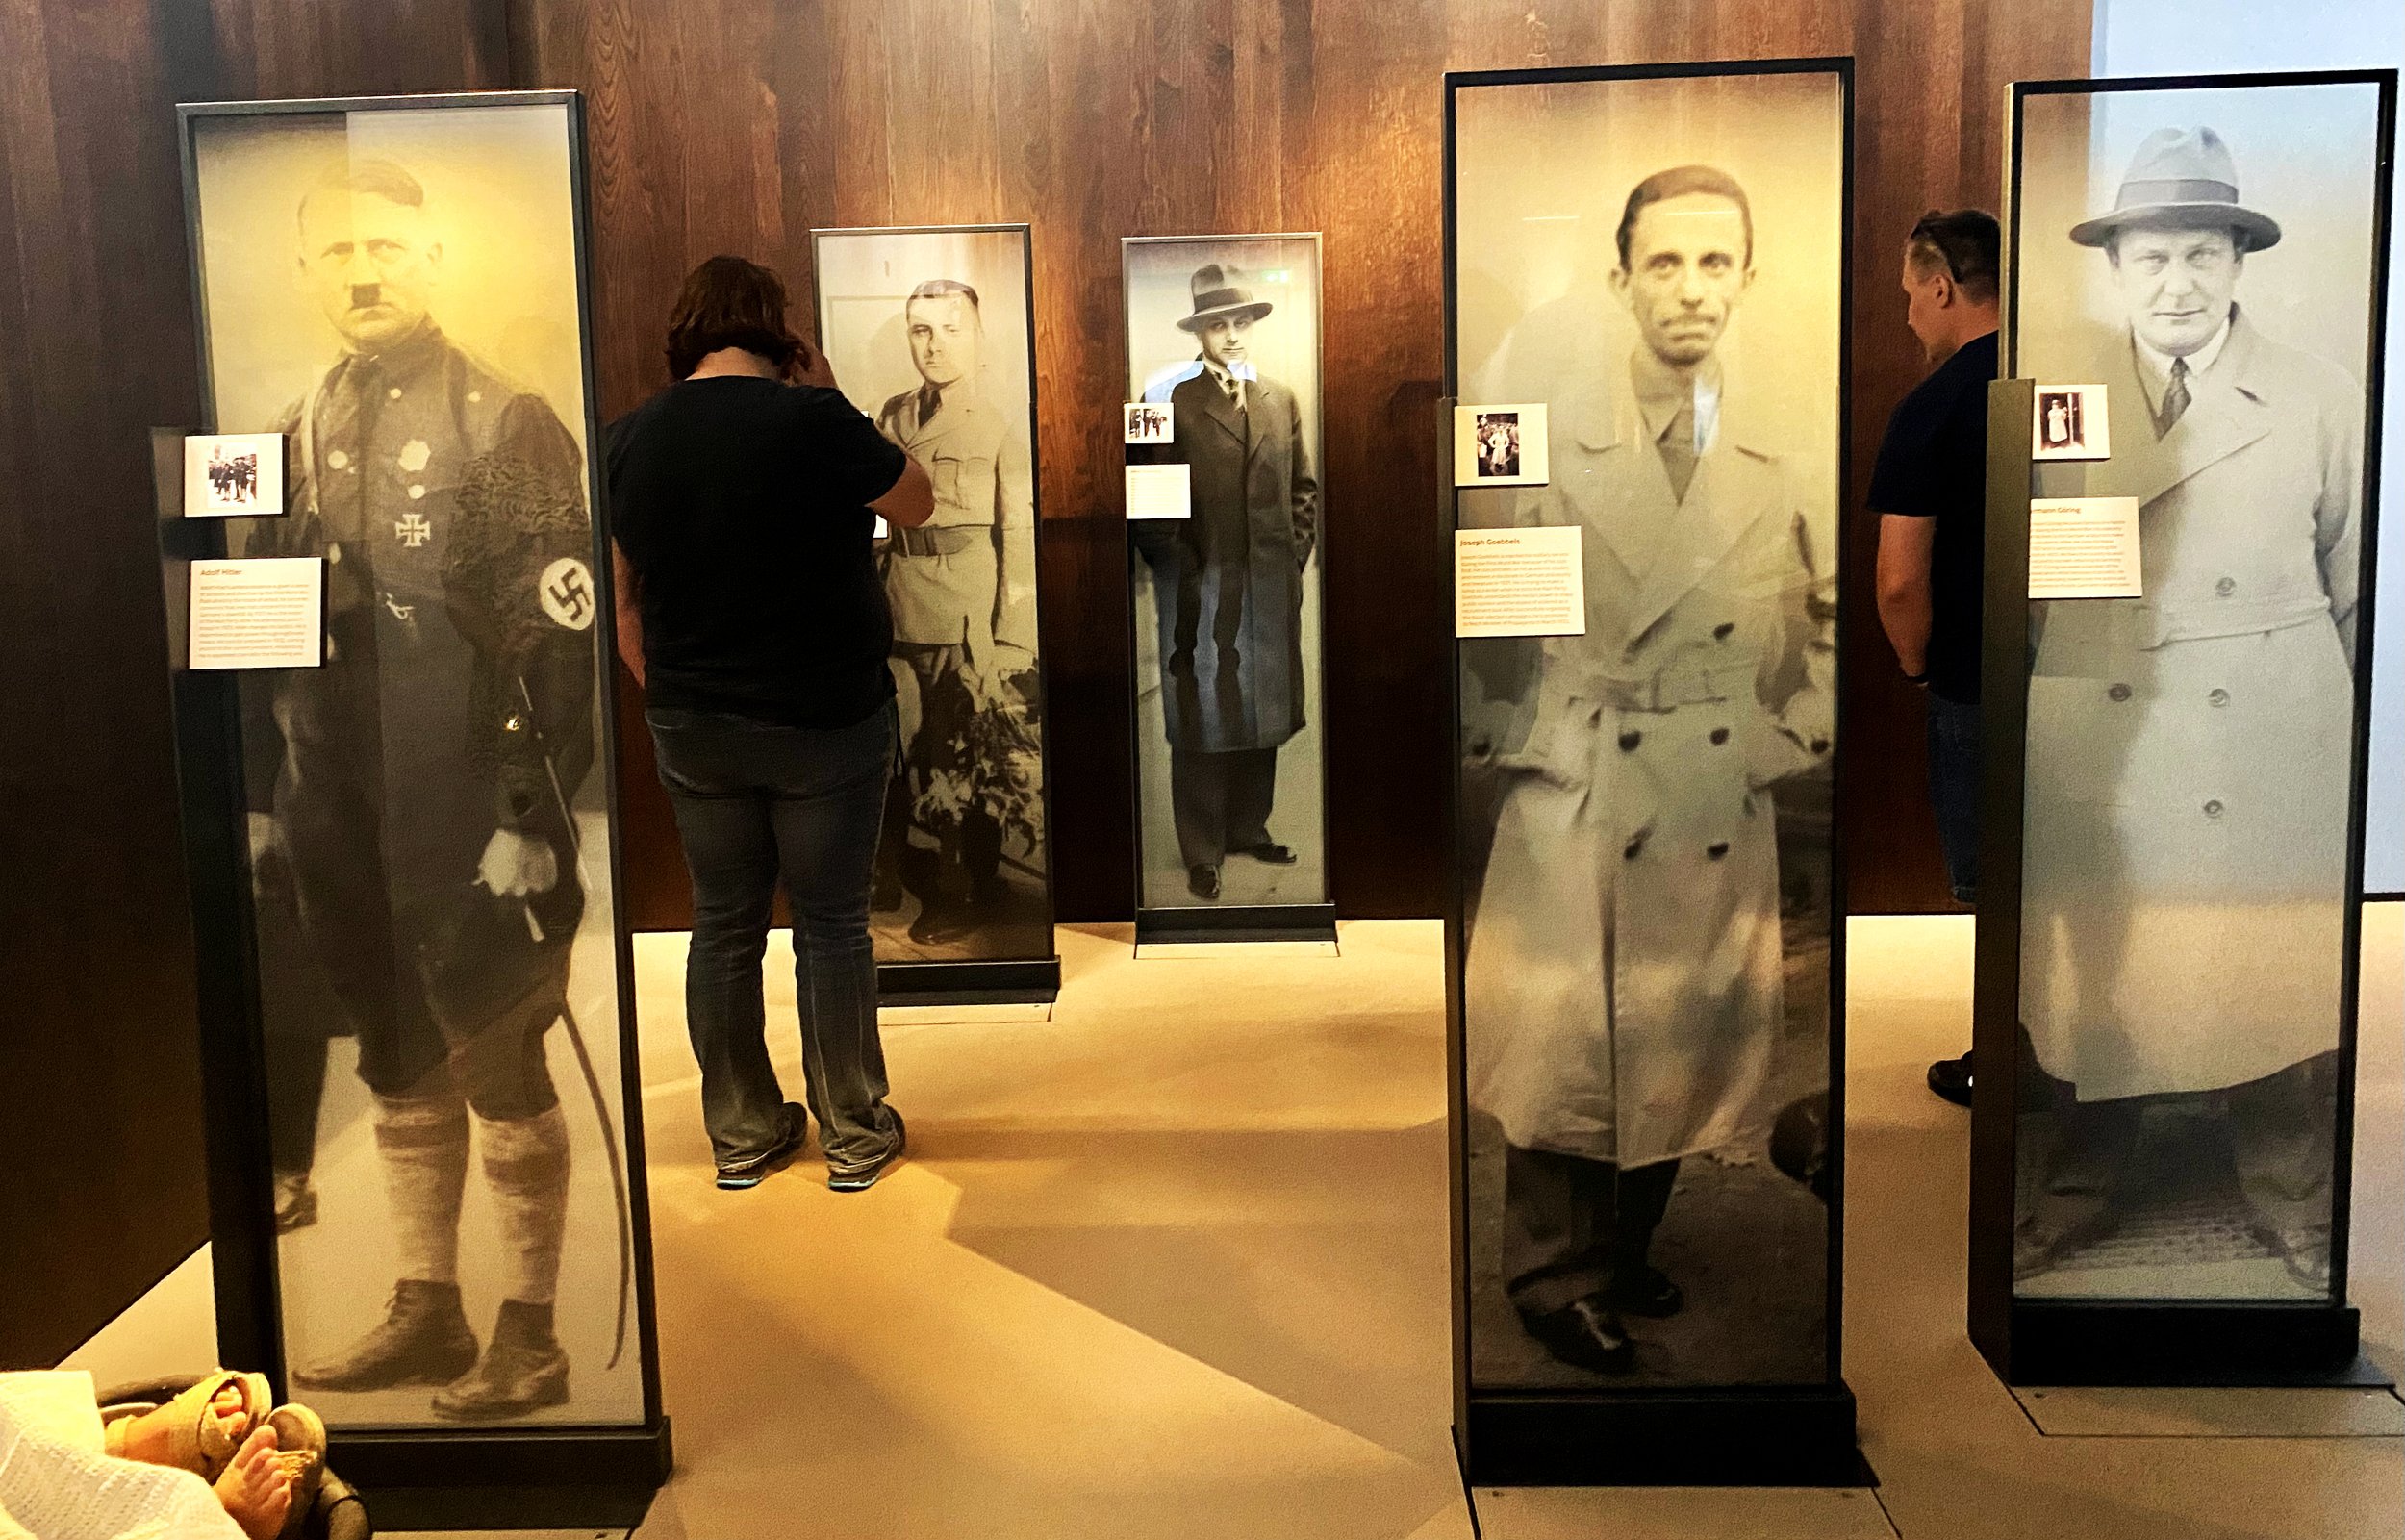  Visitors view an exhibit displaying life-size images of the Nazi leadership at the Imperial War Museum.  My father was an avid historian and was an OSS operative in World War II. 